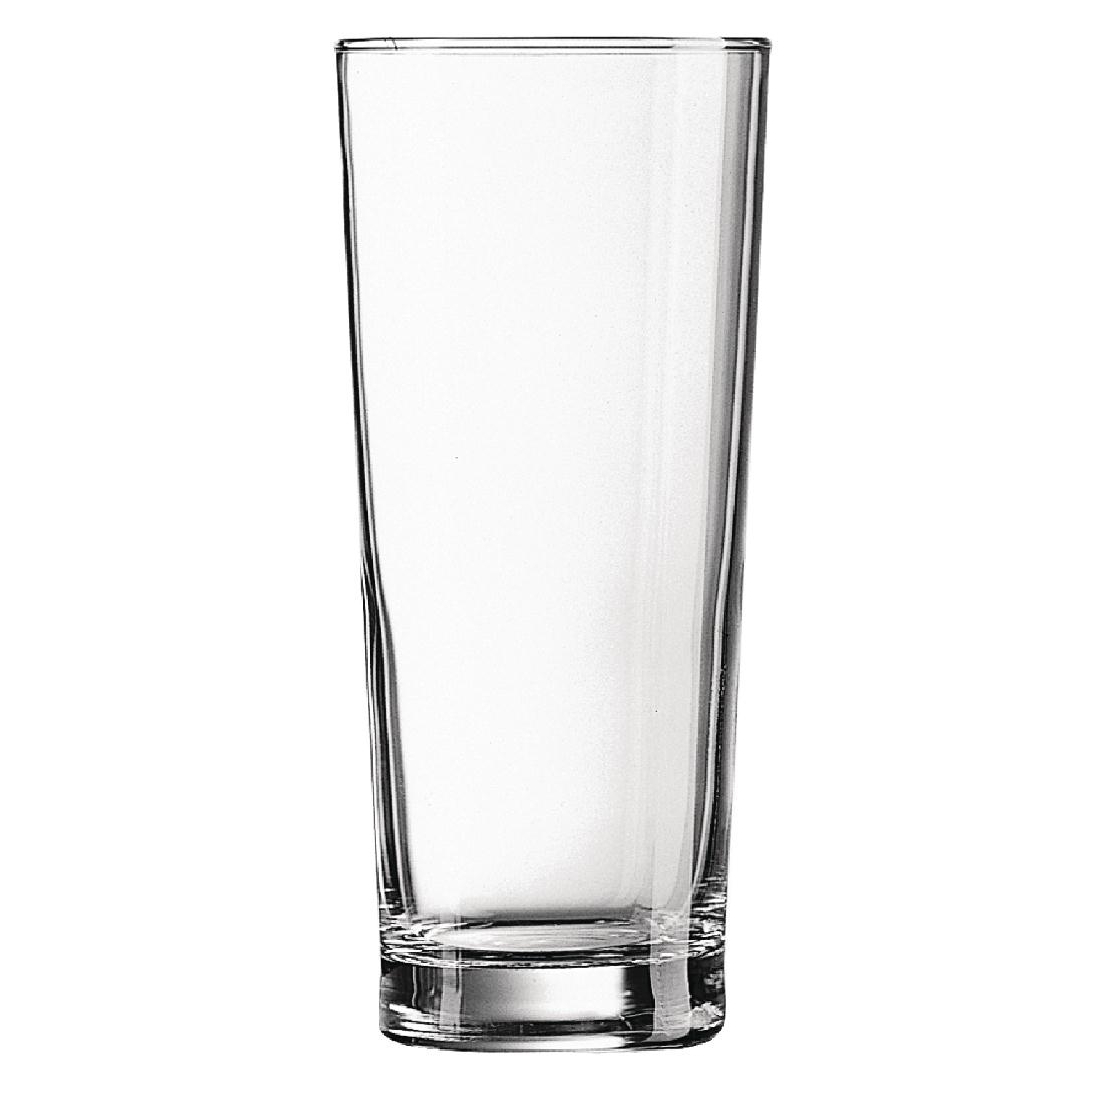 Arcoroc Premier Nucleated Highball Glasses 285ml CE Marked